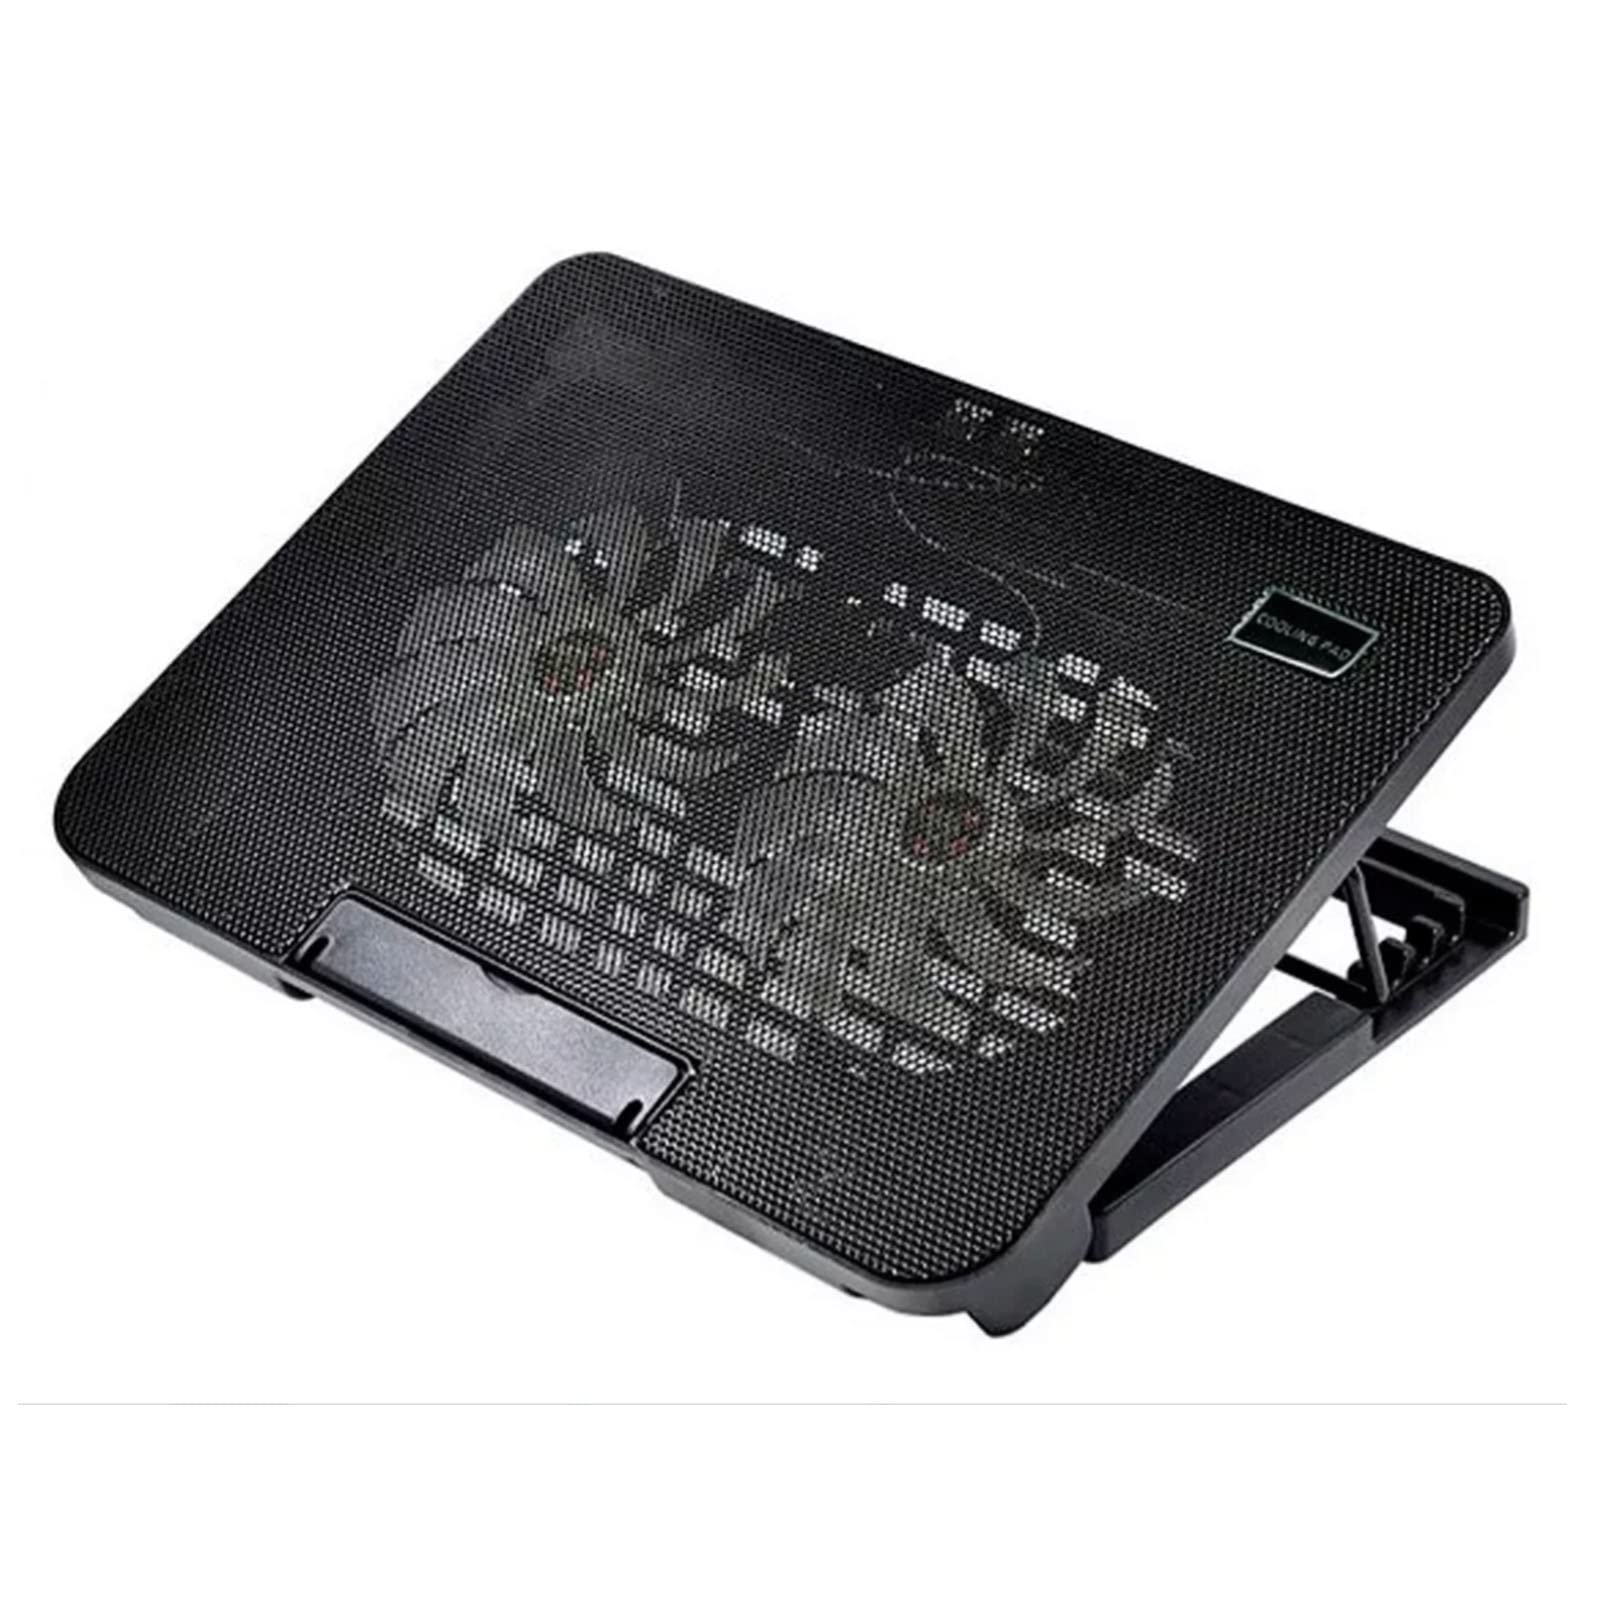 Laptop Cooler Cooling Pad, Dual Fan USB Powered Gaming Cooling Pad Stand High Speed Laptop Cooling Pad for 14in 15in 17in Devices